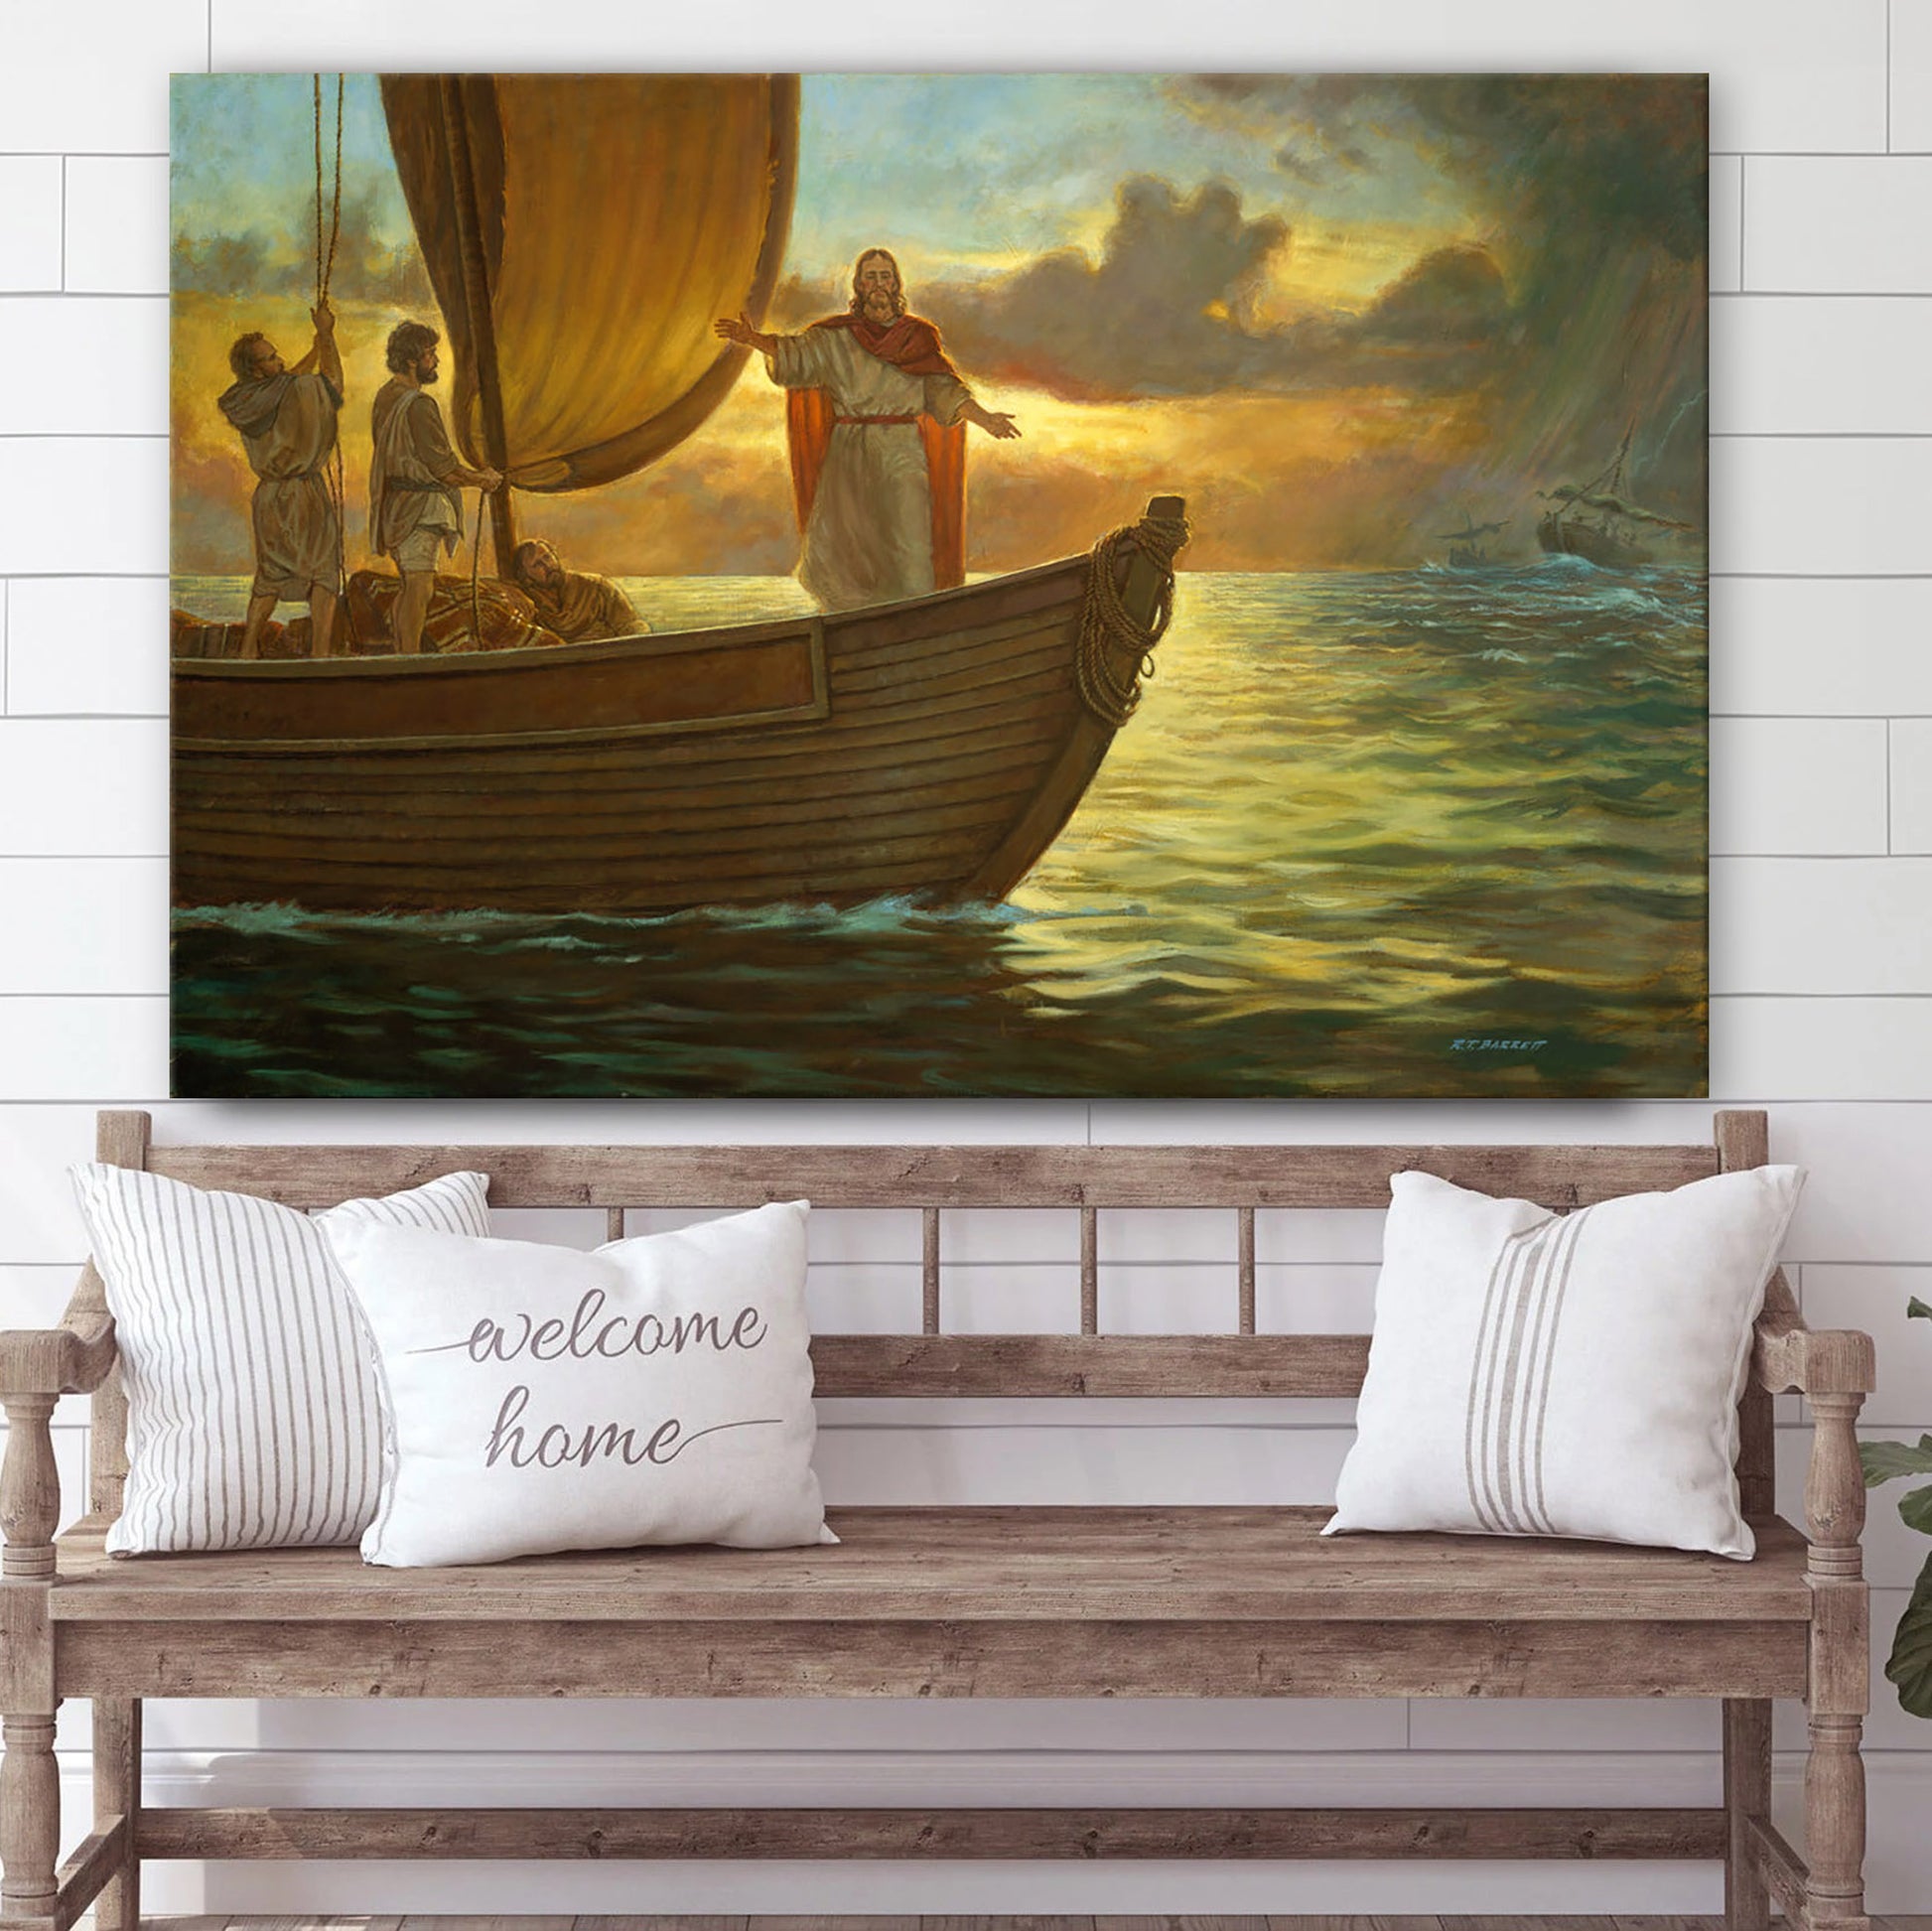 Stilling The Storm Canvas Picture - Jesus Canvas Wall Art - Christian Wall Art